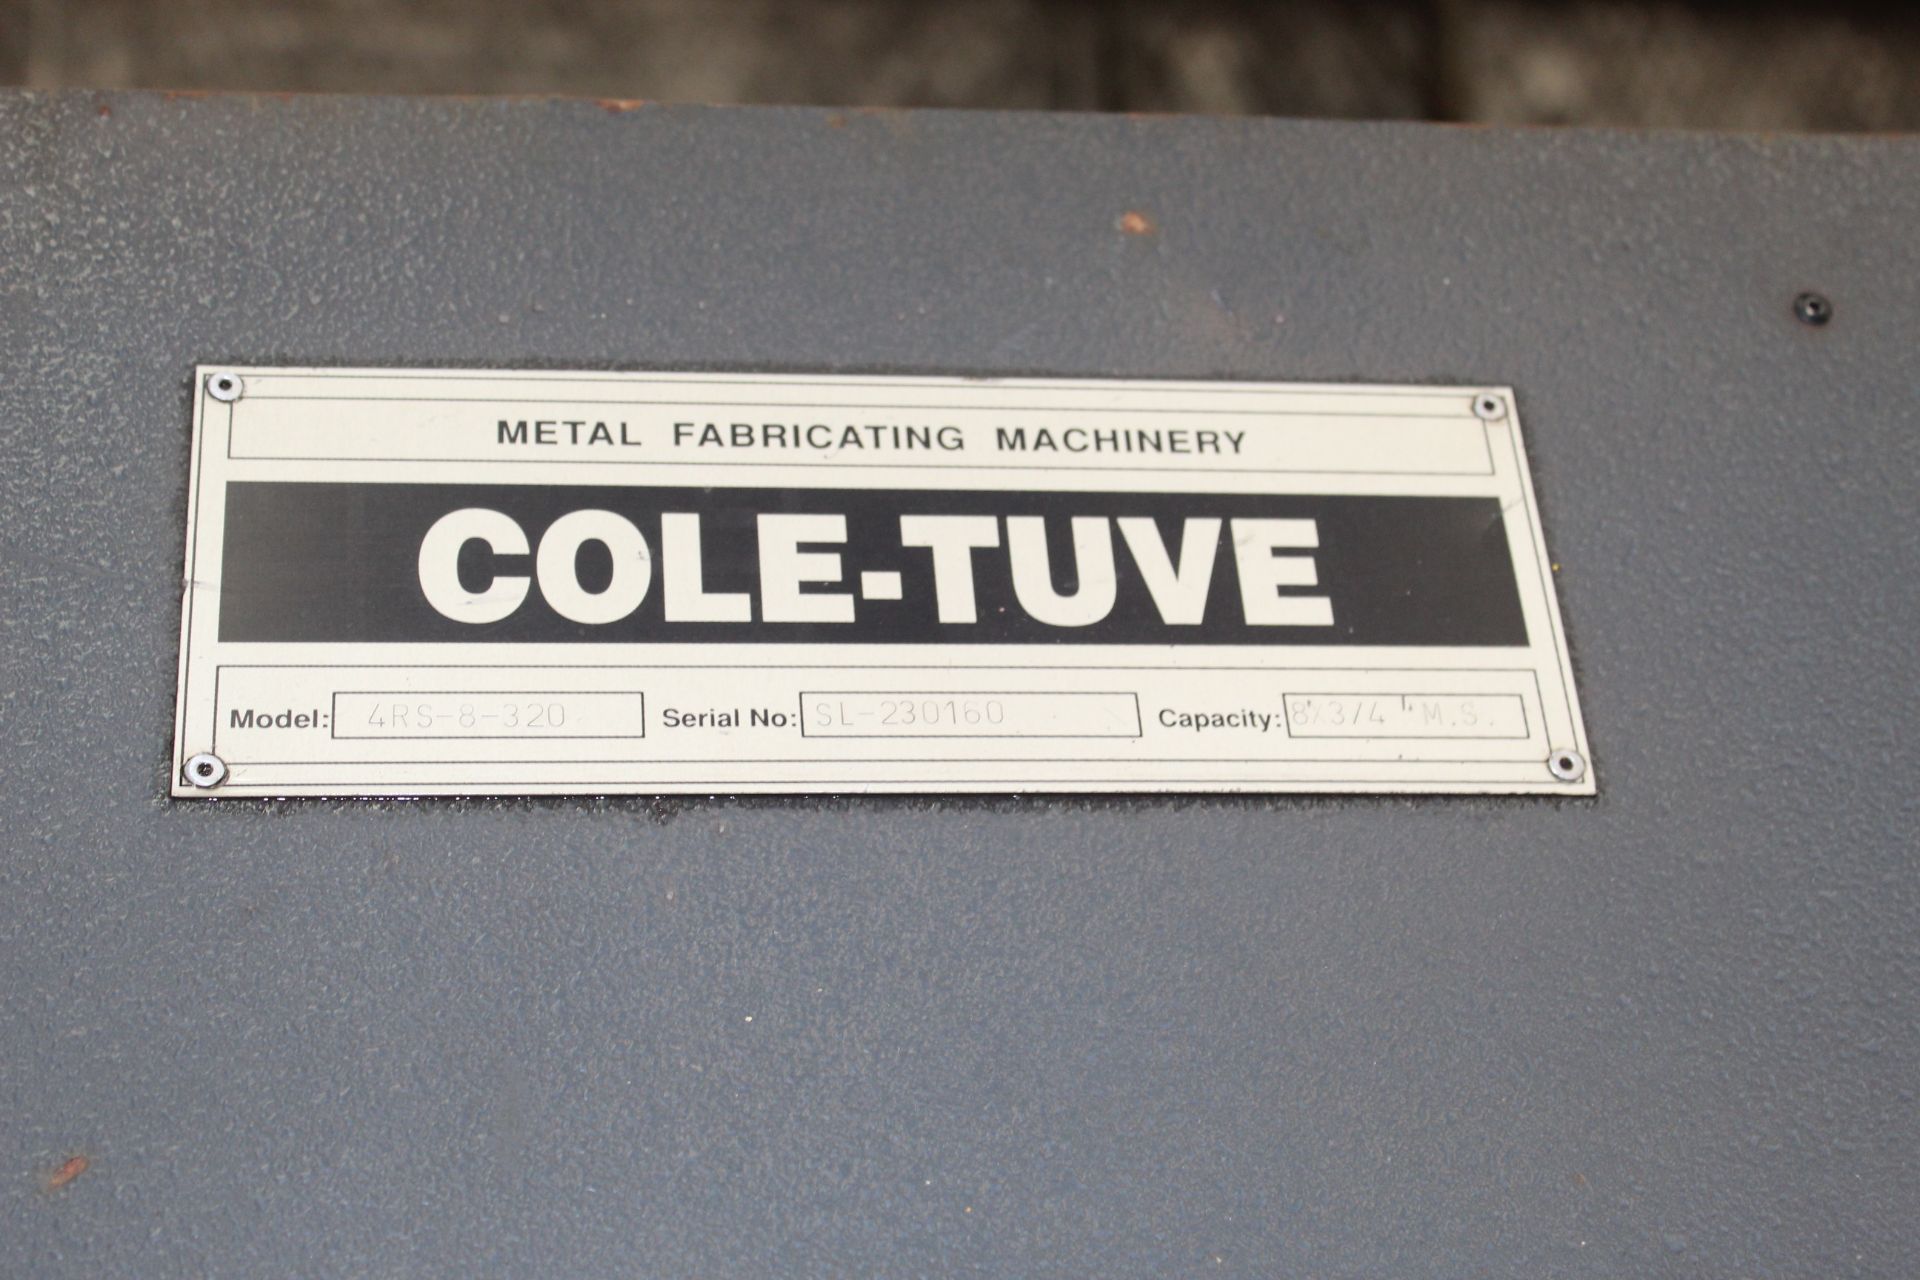 HYDRAULIC PLATE ROLL, COLE-TUVE MDL. 4RS-8-320 4-ROLL, new 2007, 8' x 3/4" in mild steel, pendant - Image 2 of 3